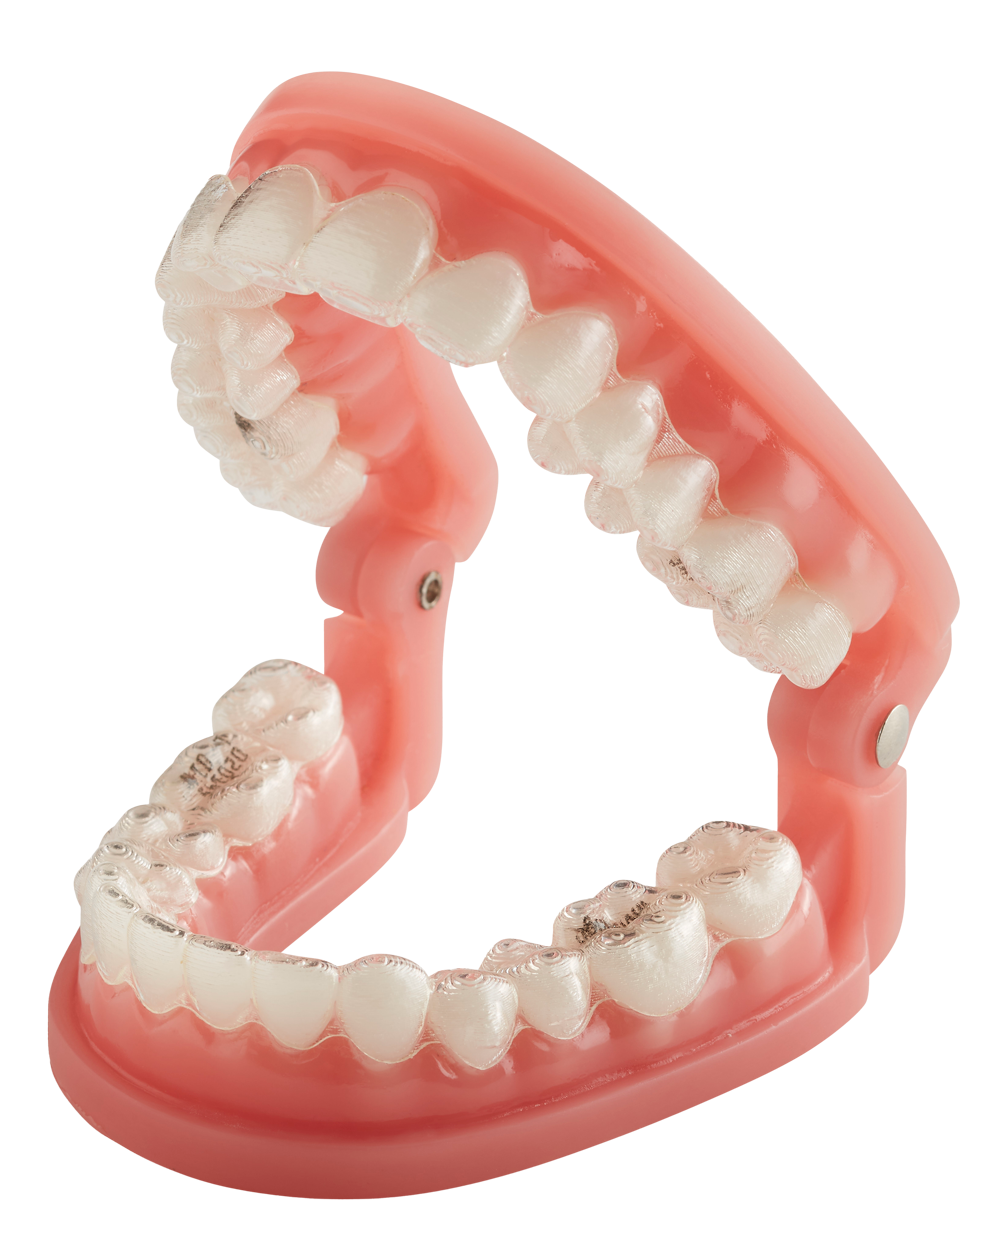 Splints and Appliances, Clear Sequential Aligners